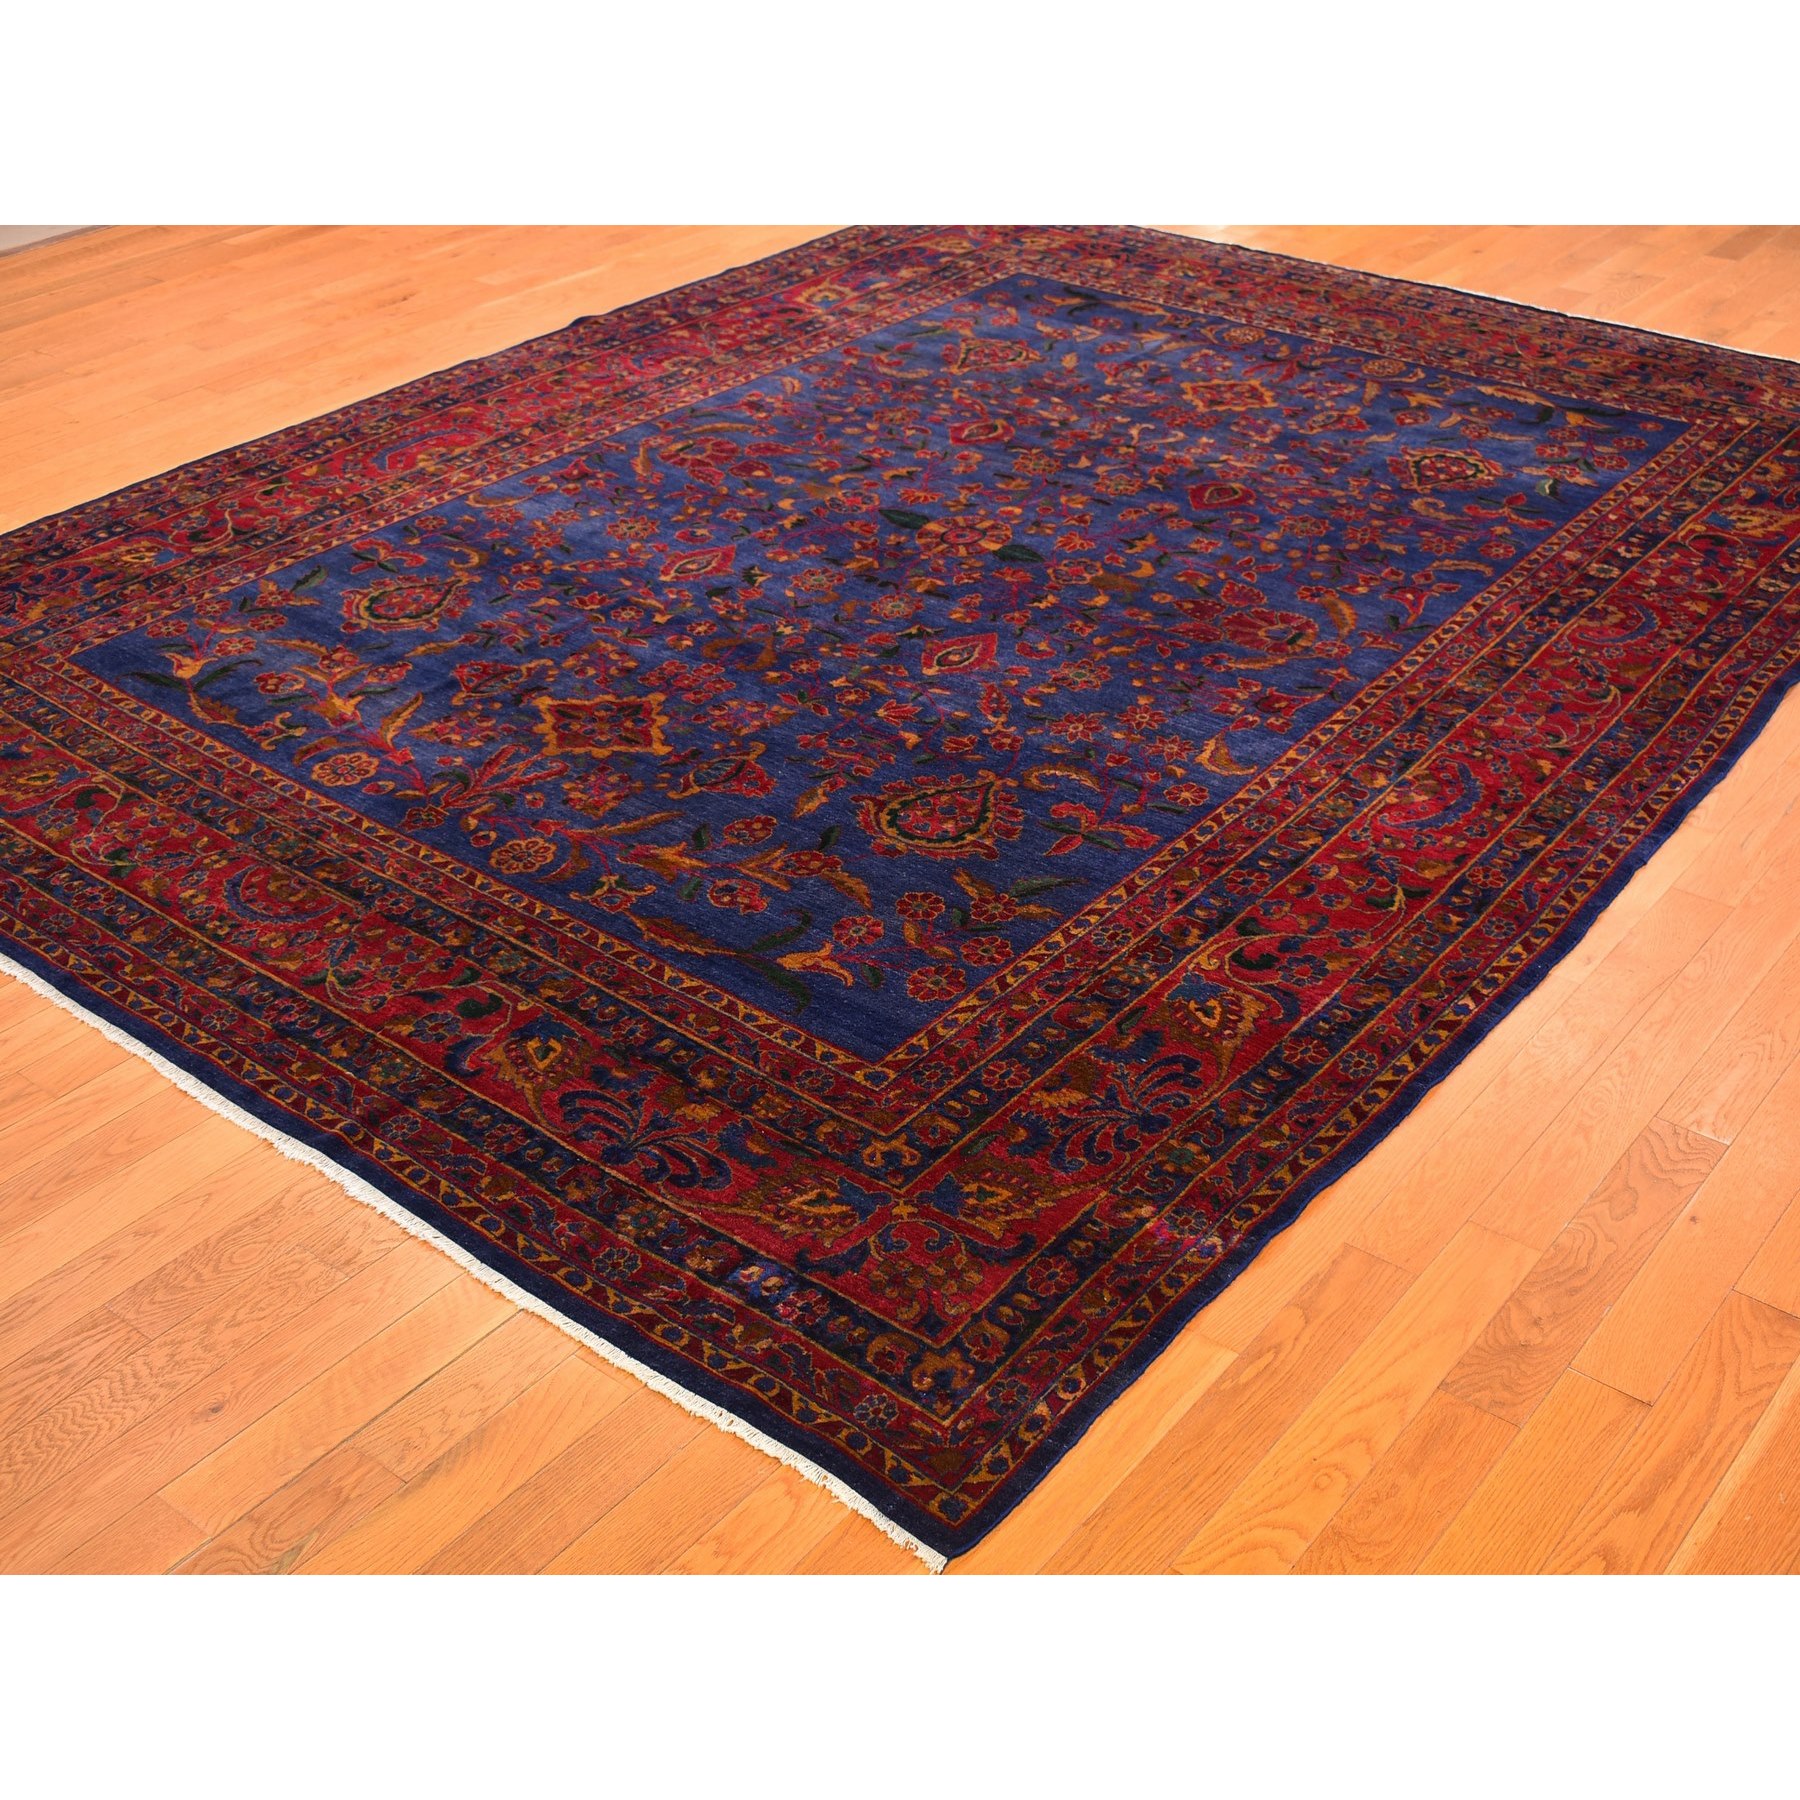 8'10"x11'1" Antique Persian Kashan Good Condition Slight Wear Soft 300 KPSI Saturated Colors Pure Wool Hand Woven Oriental Rug 